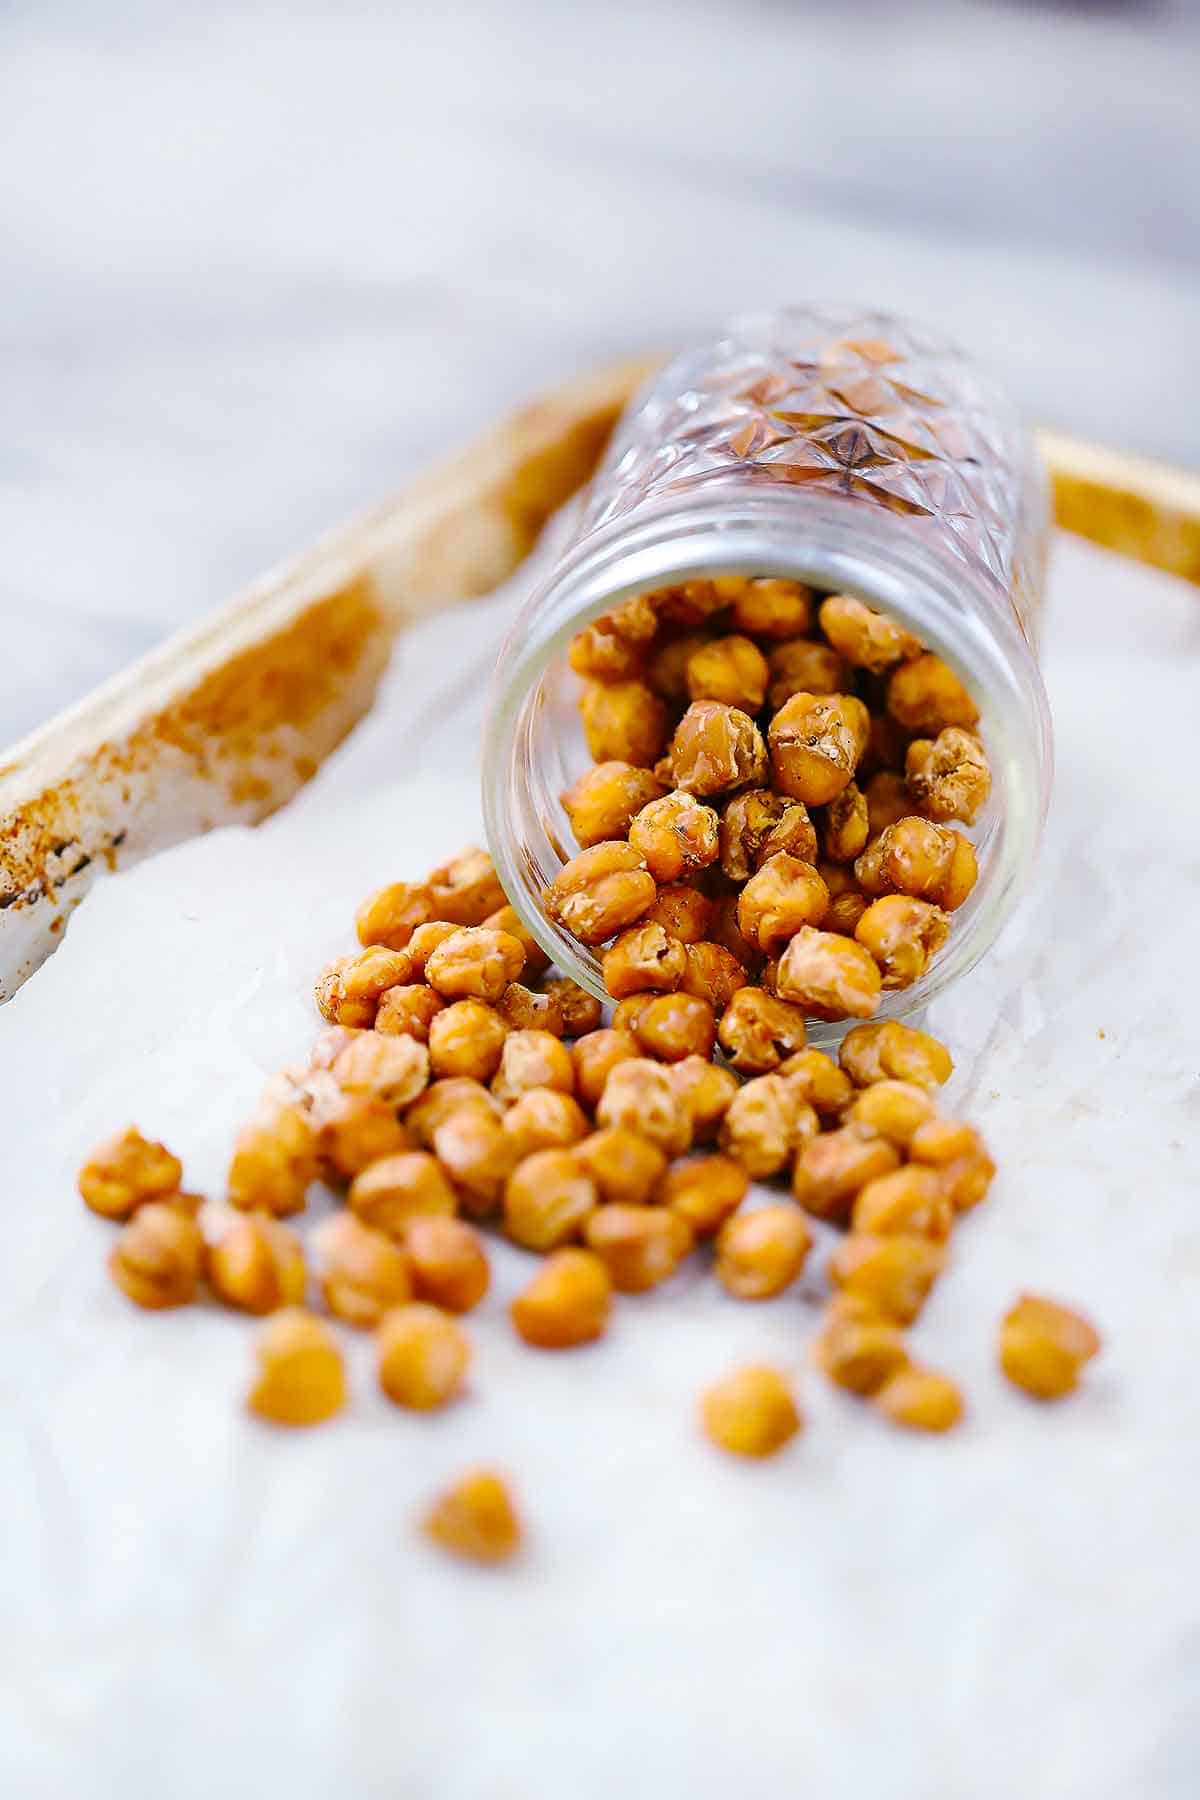 Roasted chickpeas coming out of a mason jar onto a parchment covered baking sheet.